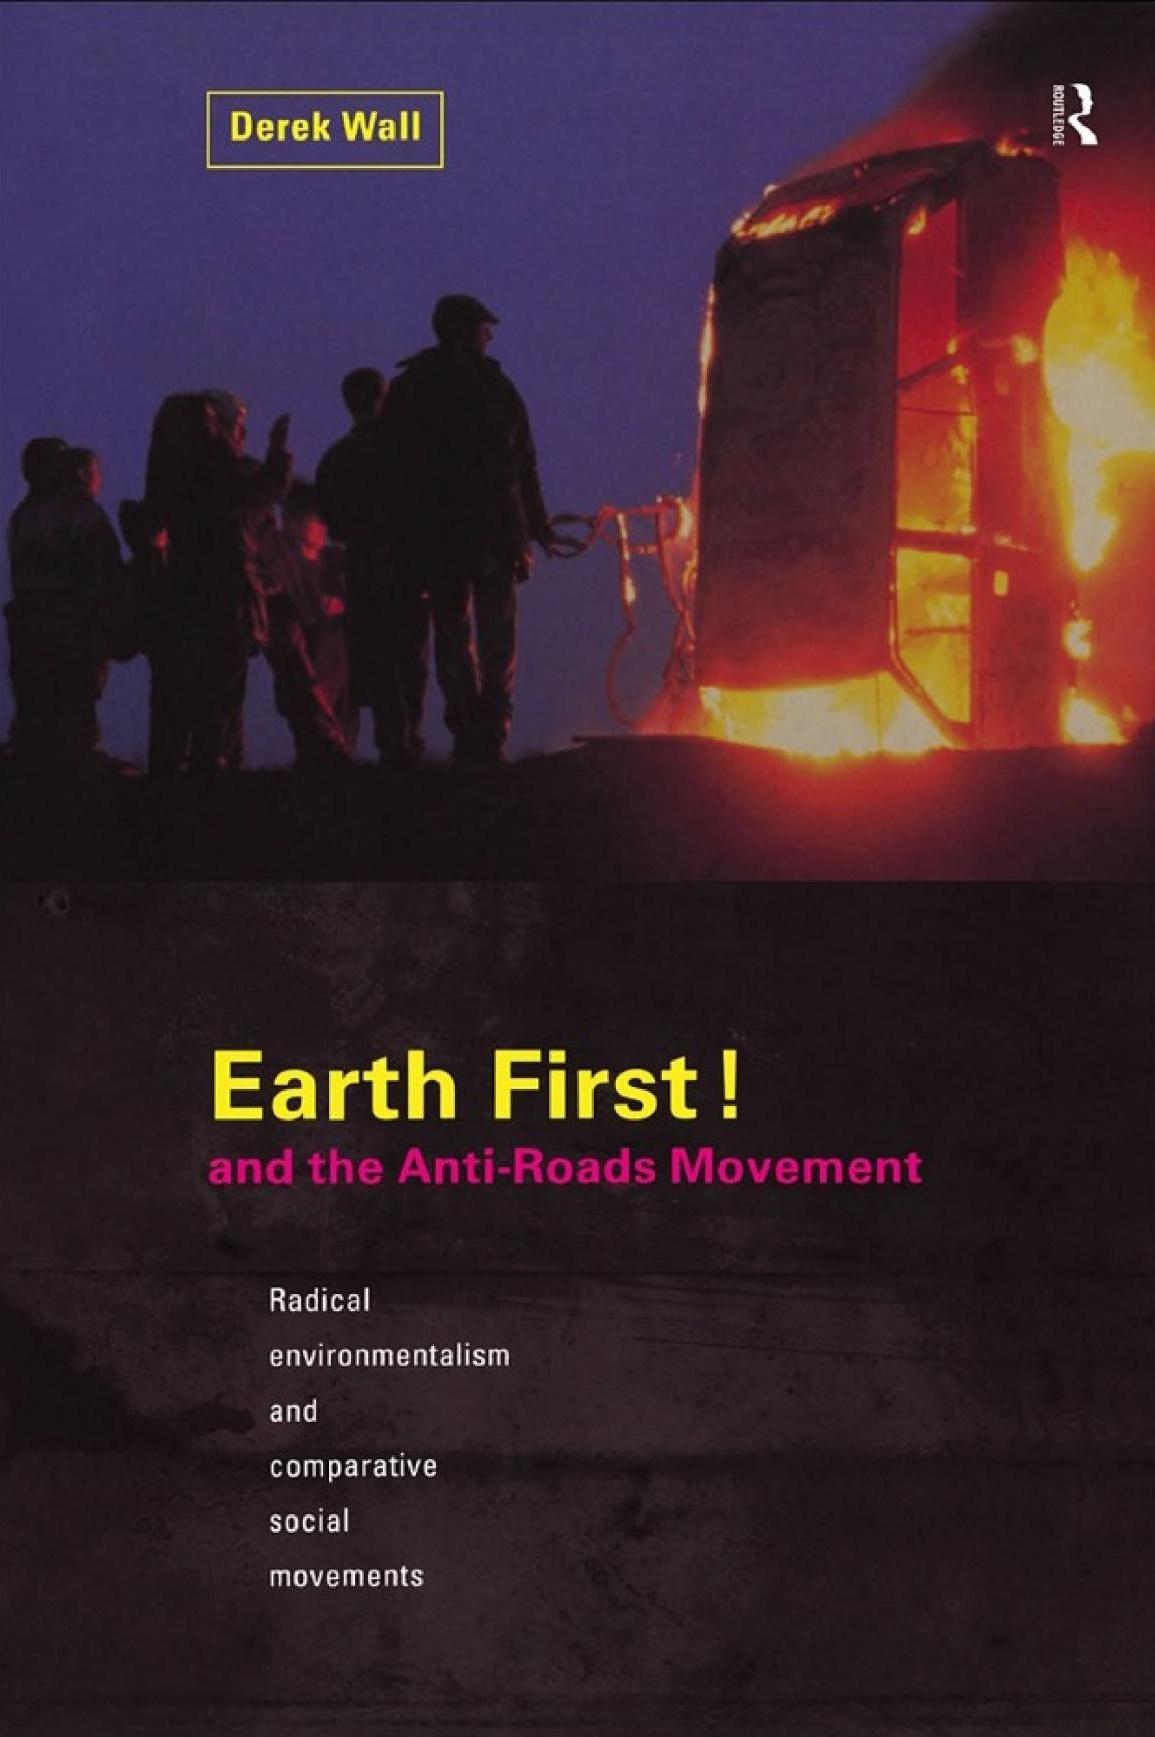 d-w-derek-wall-earth-first-and-the-anti-roads-move-1.jpg